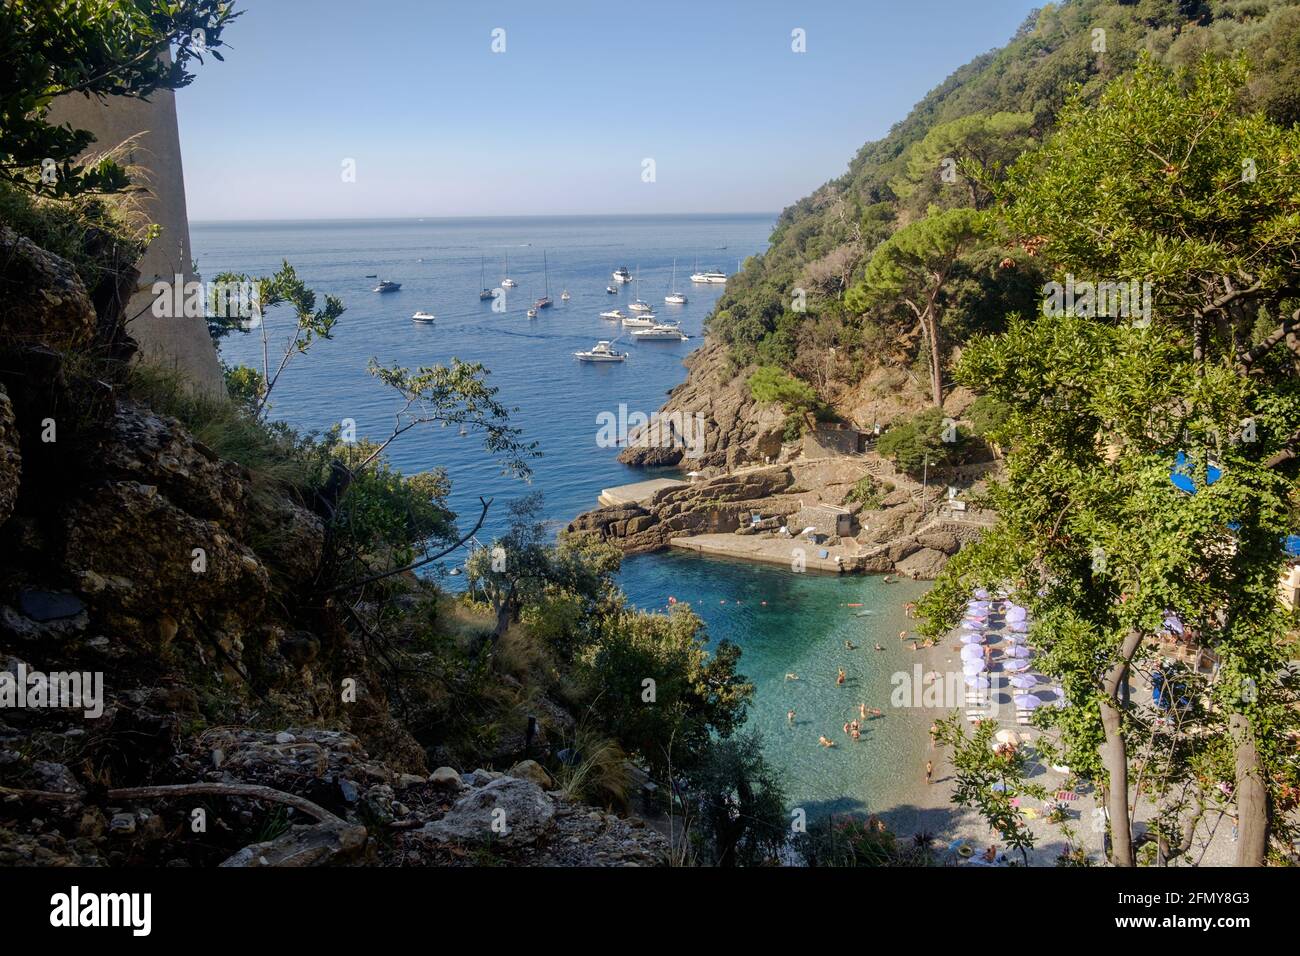 San Fruttuoso bay, with its small beach and hilly coastline. Entirely at the left, you see a part of Torre Doria. Stock Photo